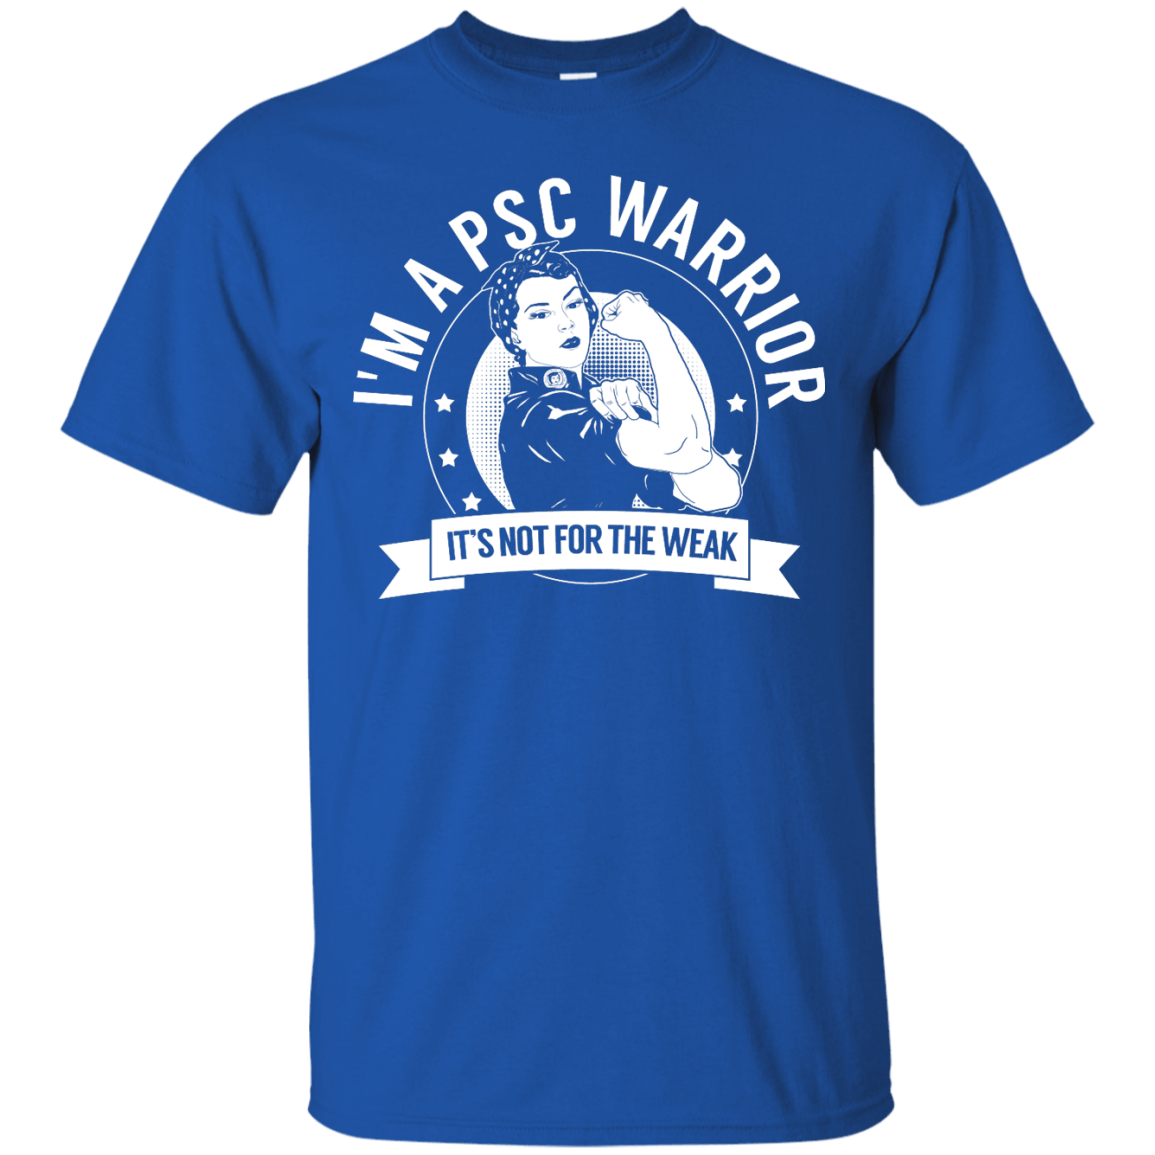 Primary Sclerosing Cholangitis - PSC Warrior Not For The Weak Unisex Shirt - The Unchargeables